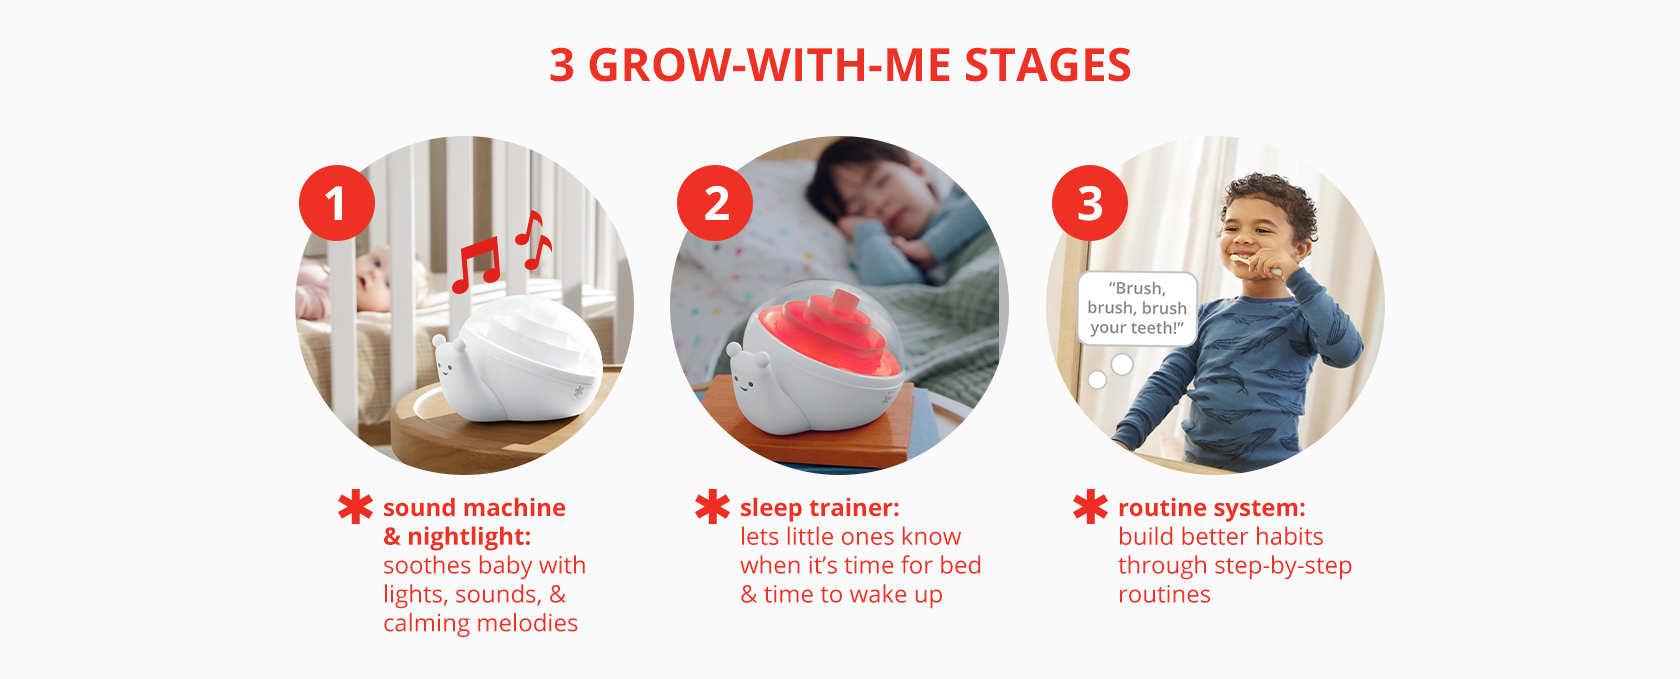 3 grow with me stages